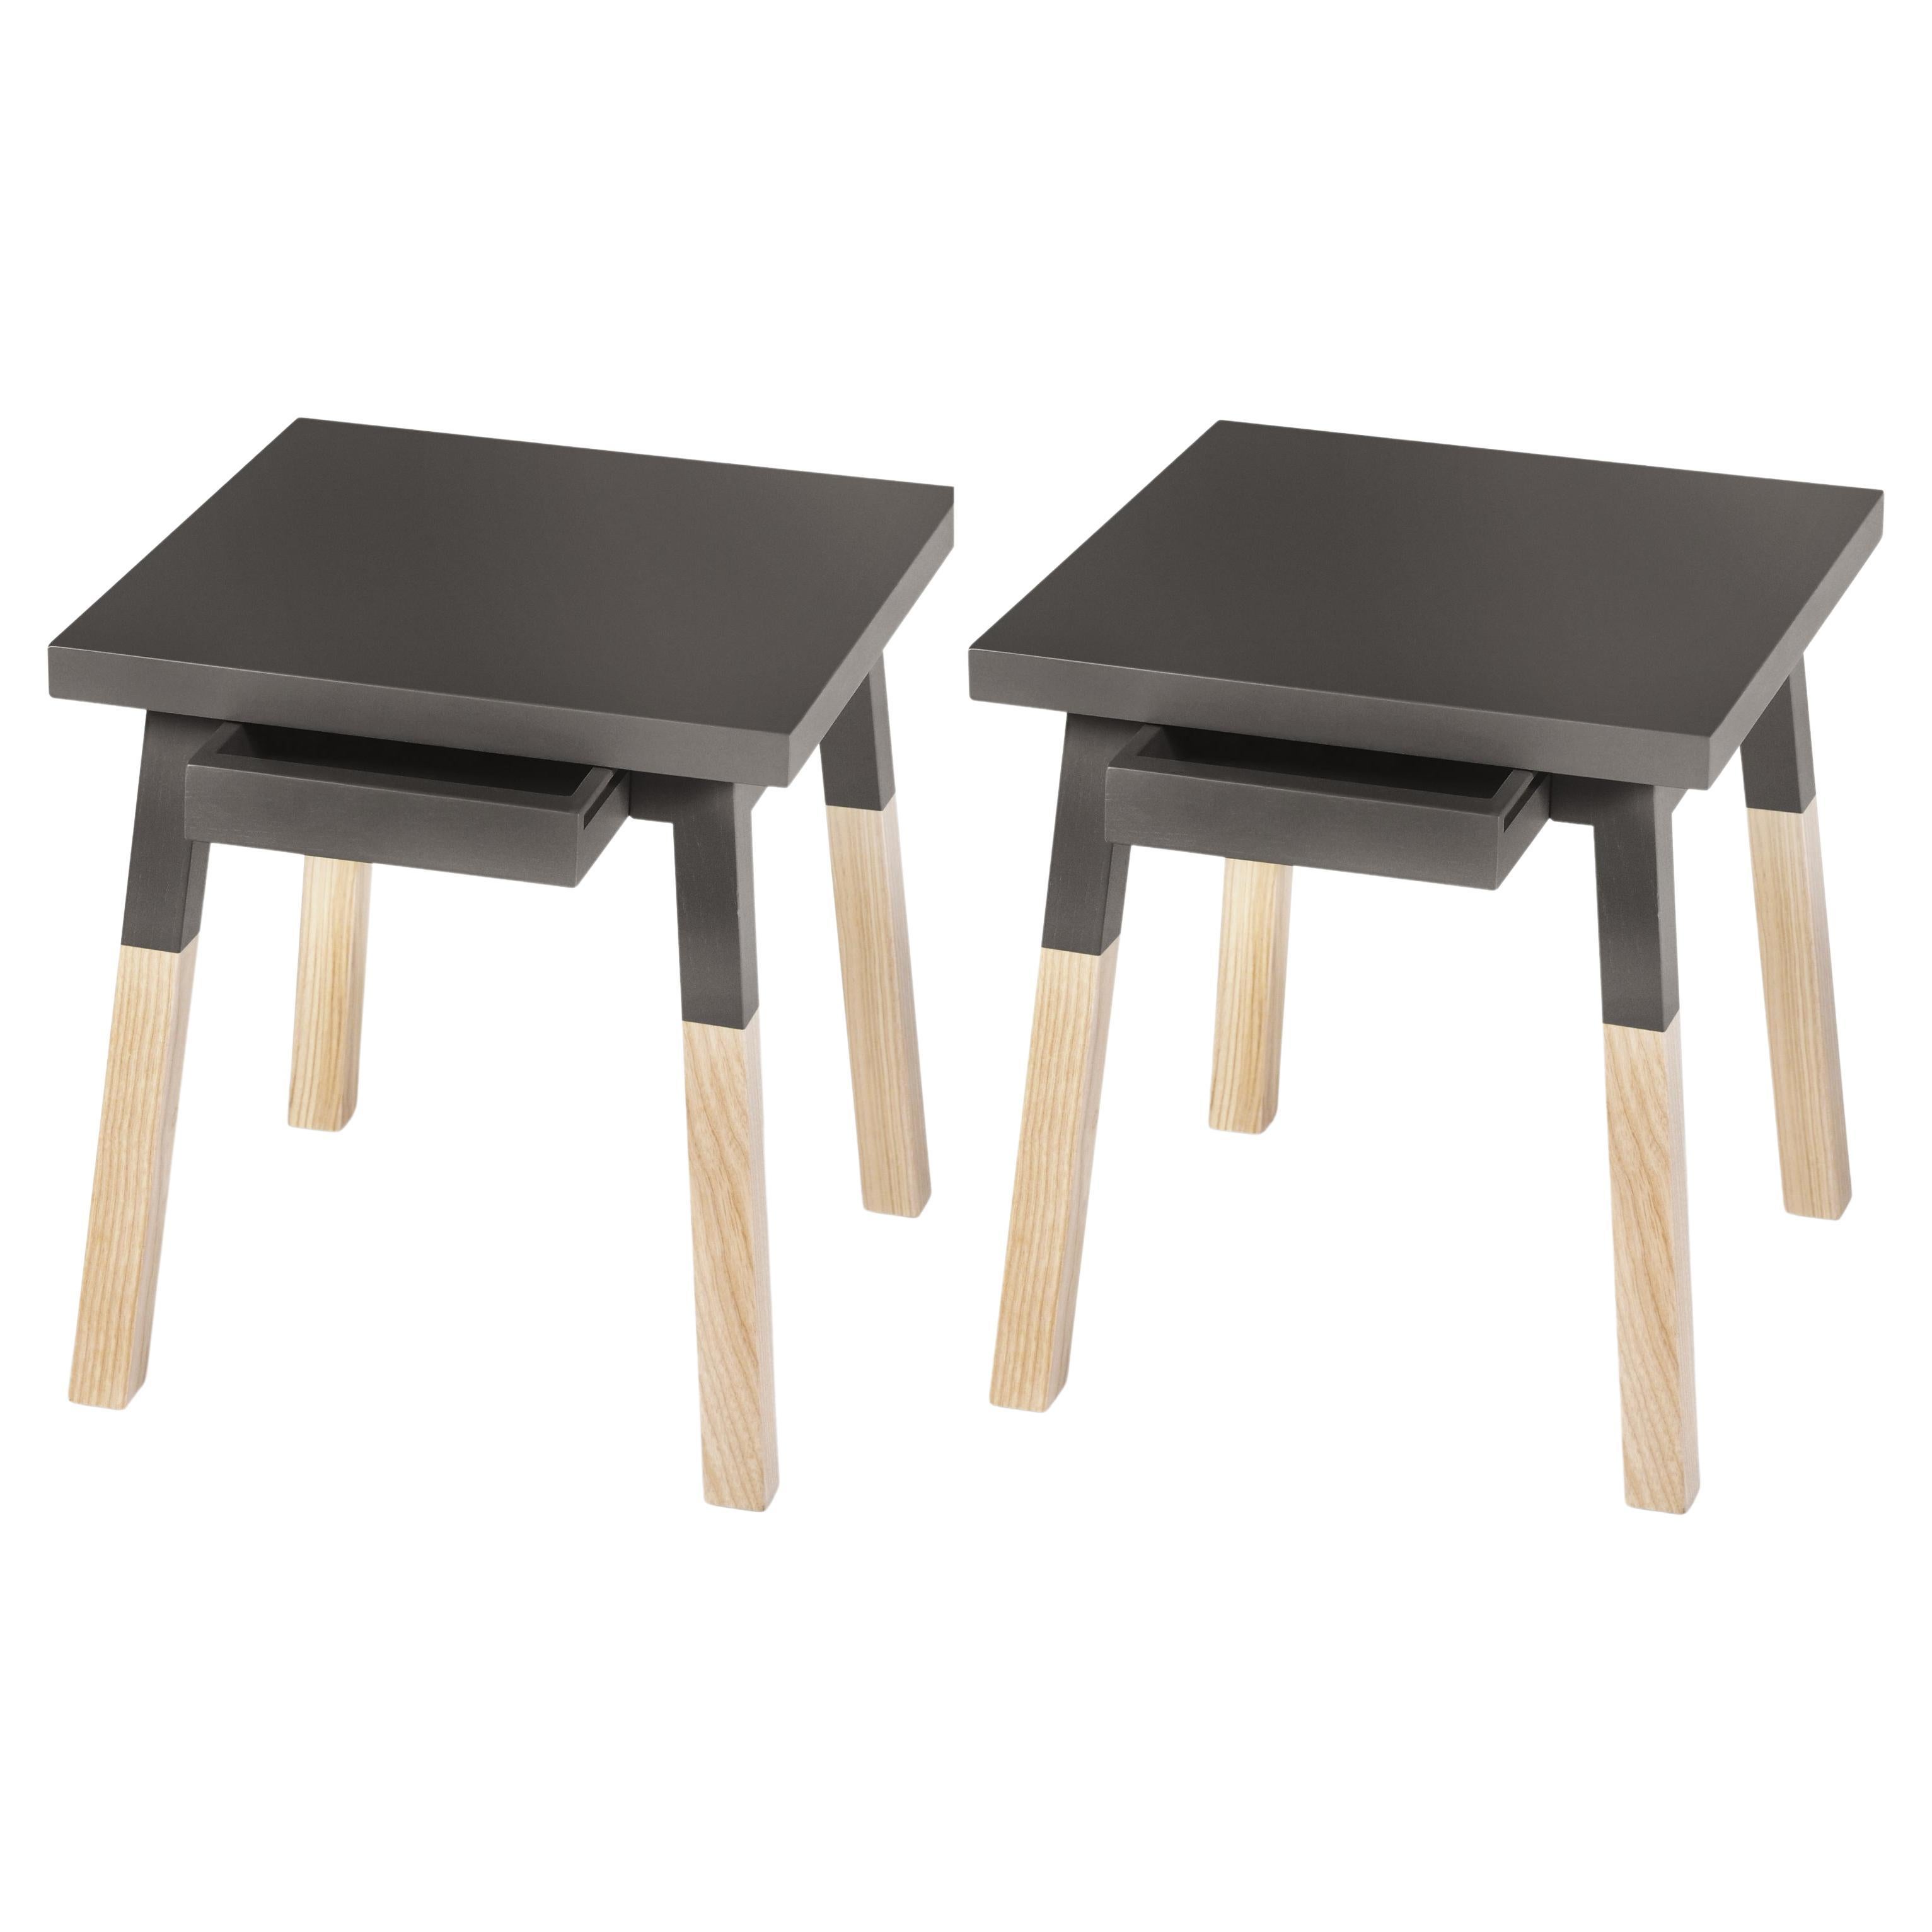 Grey Chocolate bedside tables in Ash Wood, Designer E. Gizard, Paris - pack of 2 For Sale